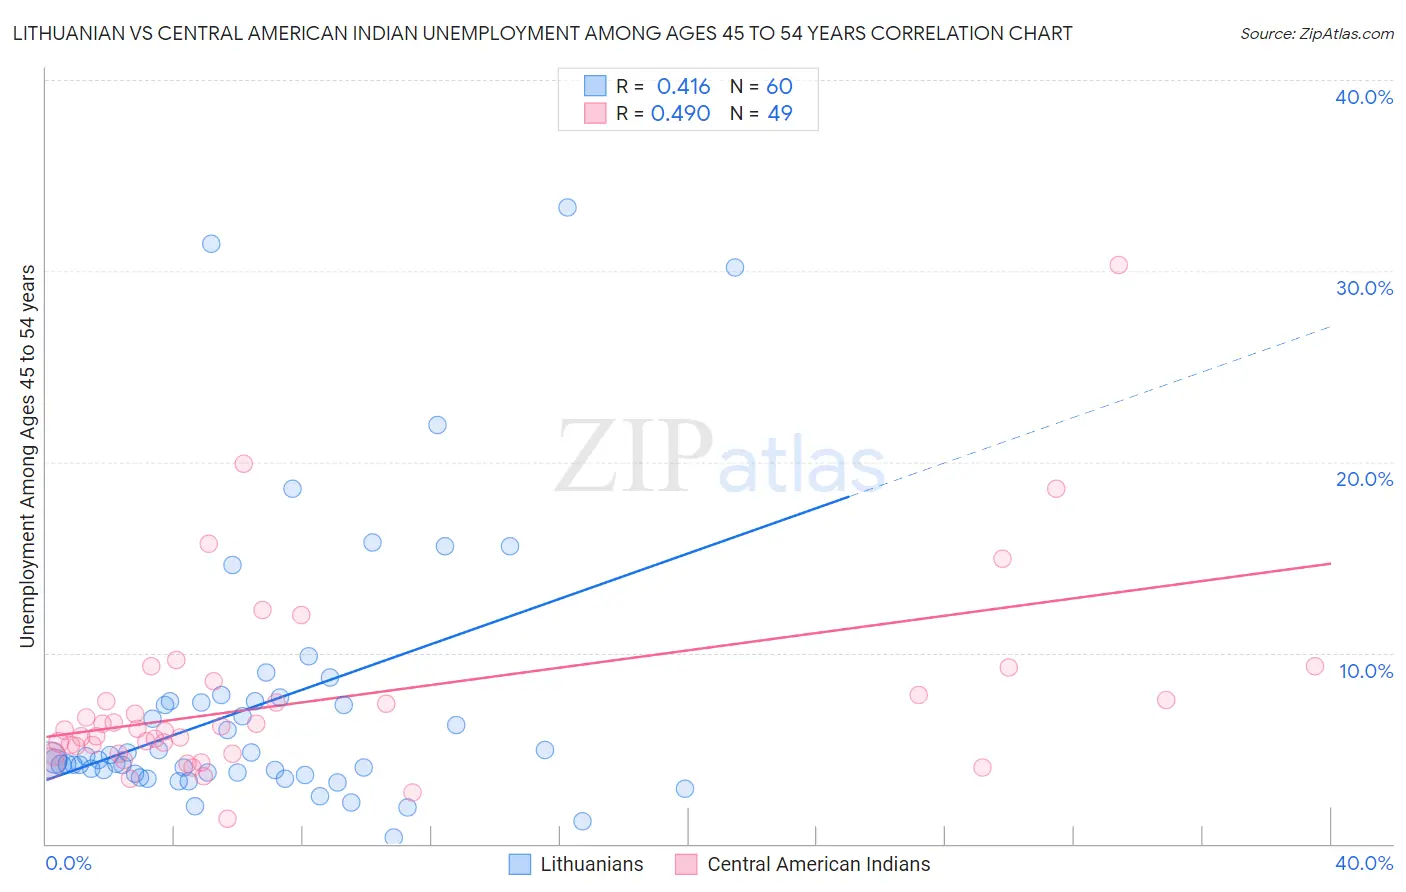 Lithuanian vs Central American Indian Unemployment Among Ages 45 to 54 years